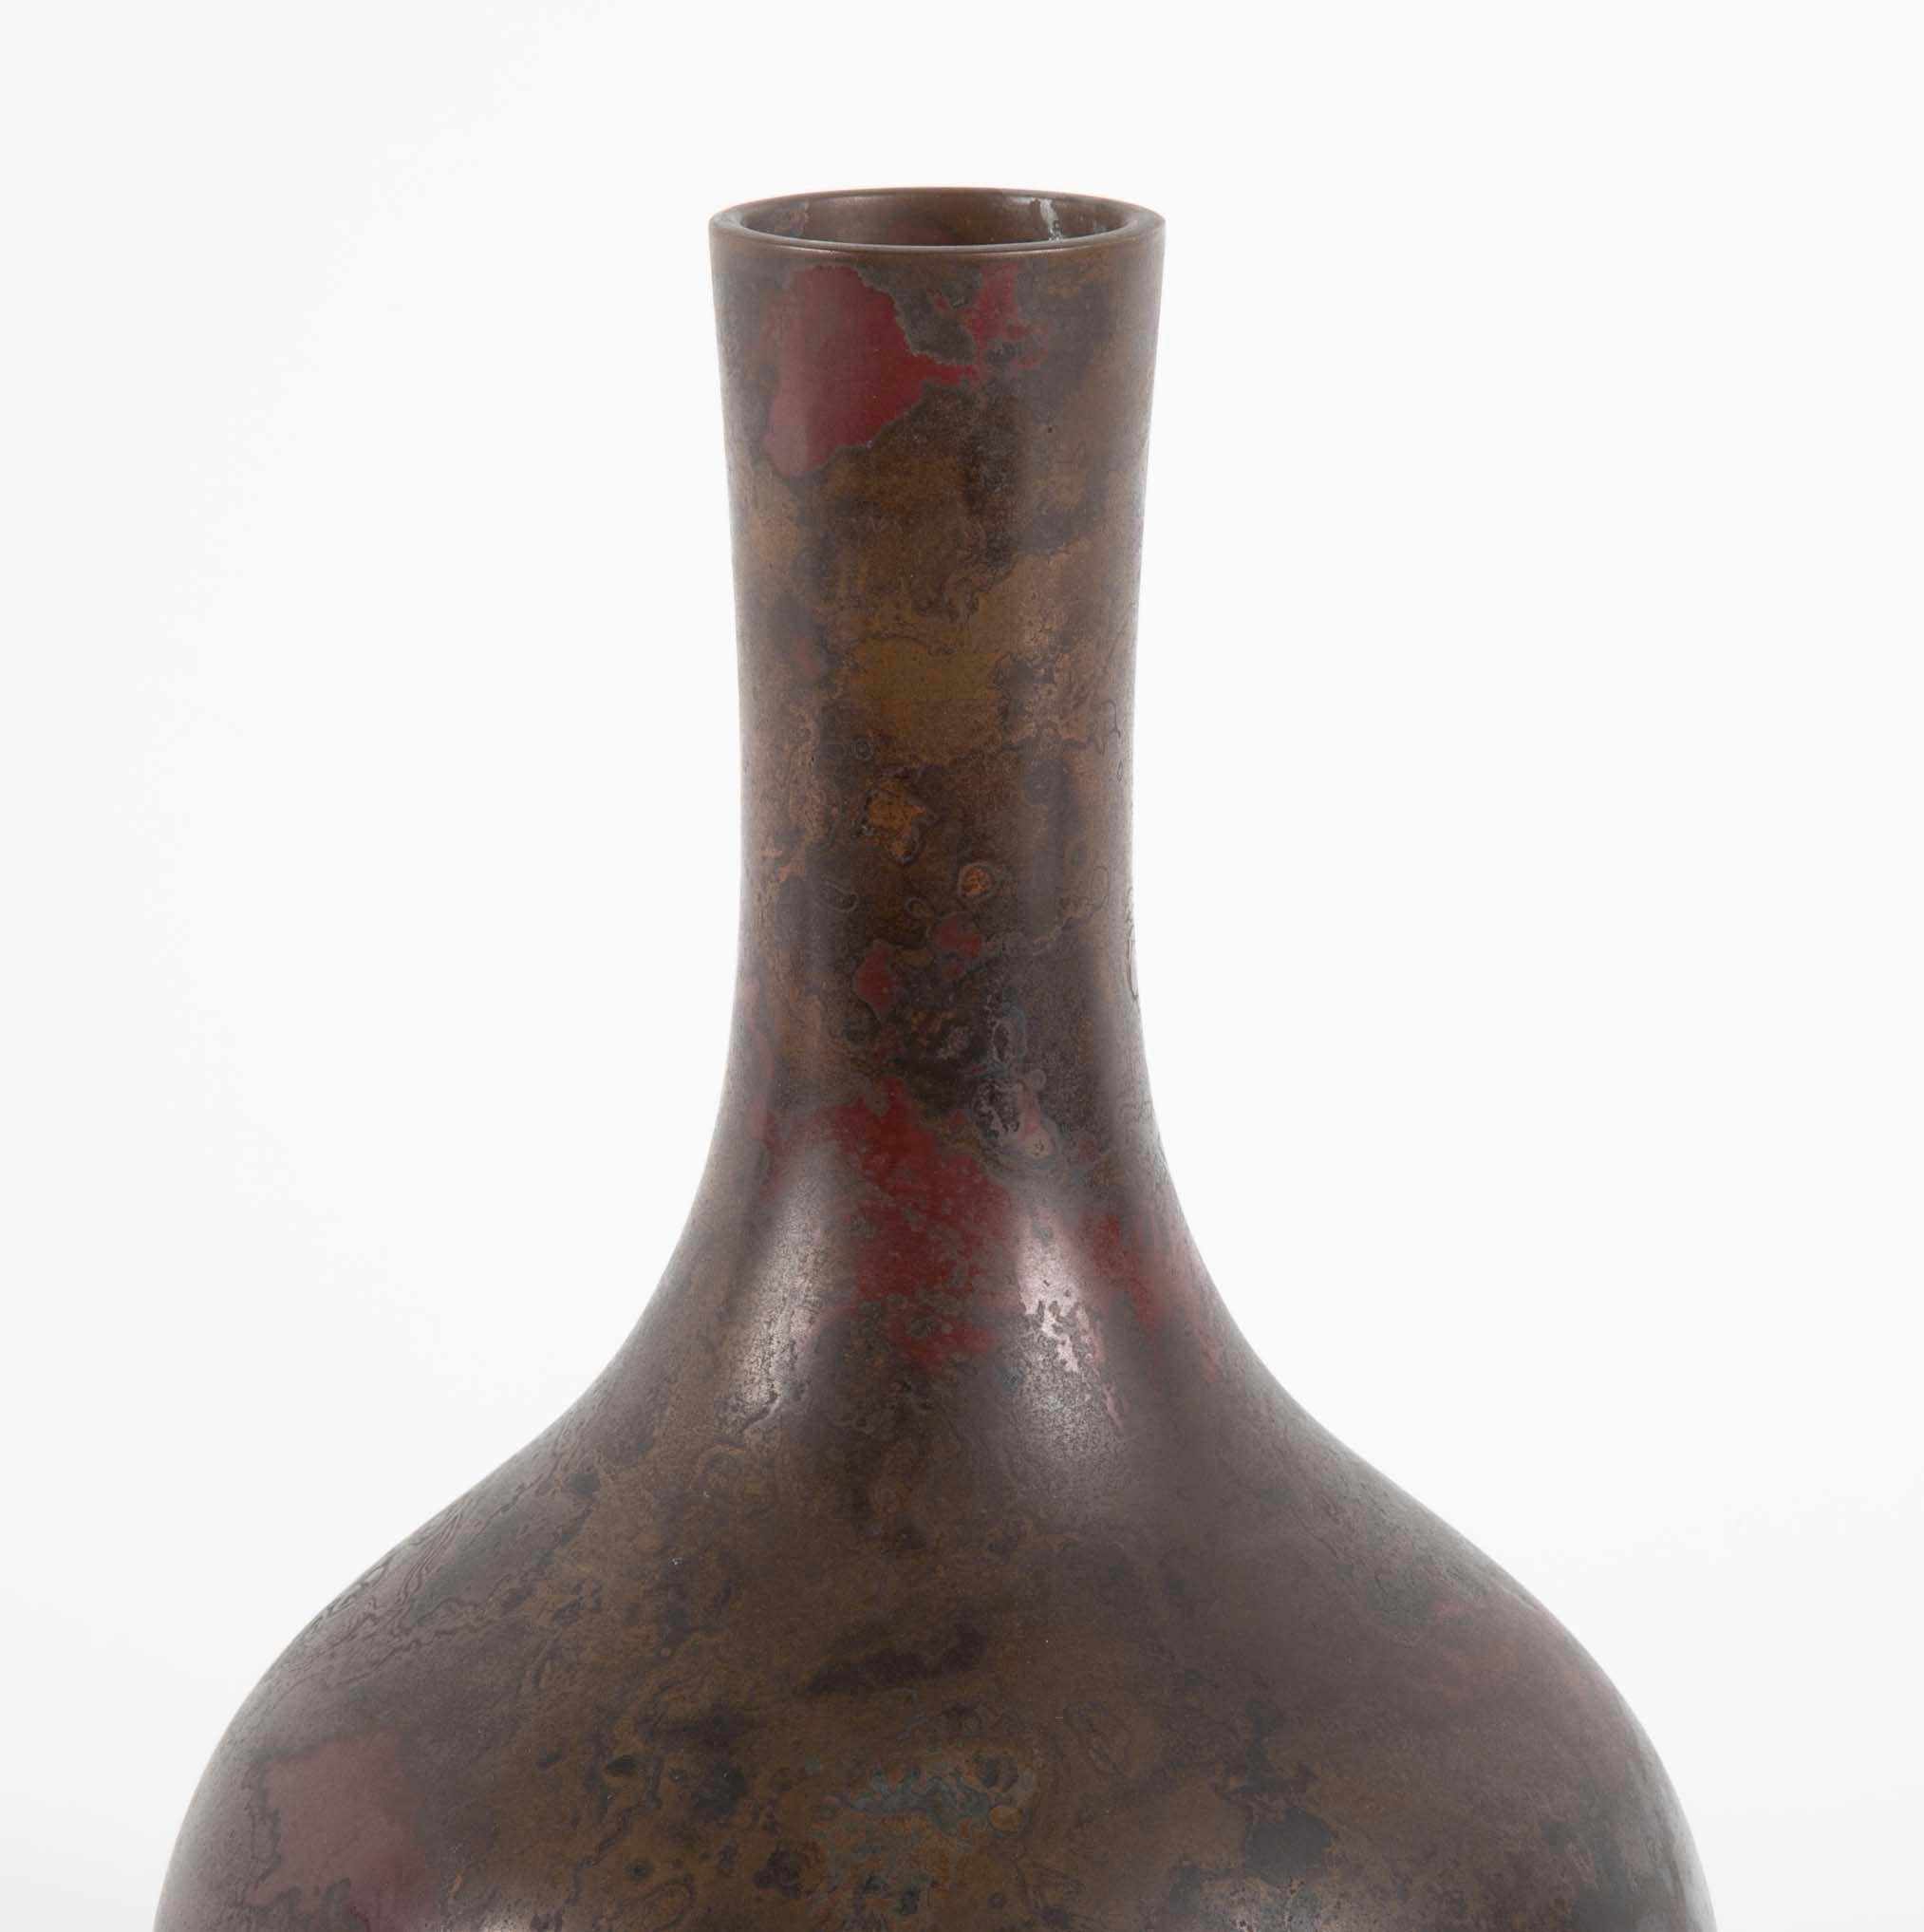 Japanese bronze vase with marbleized patina having bulbous body with elongated neck. Showa period, 20th century.